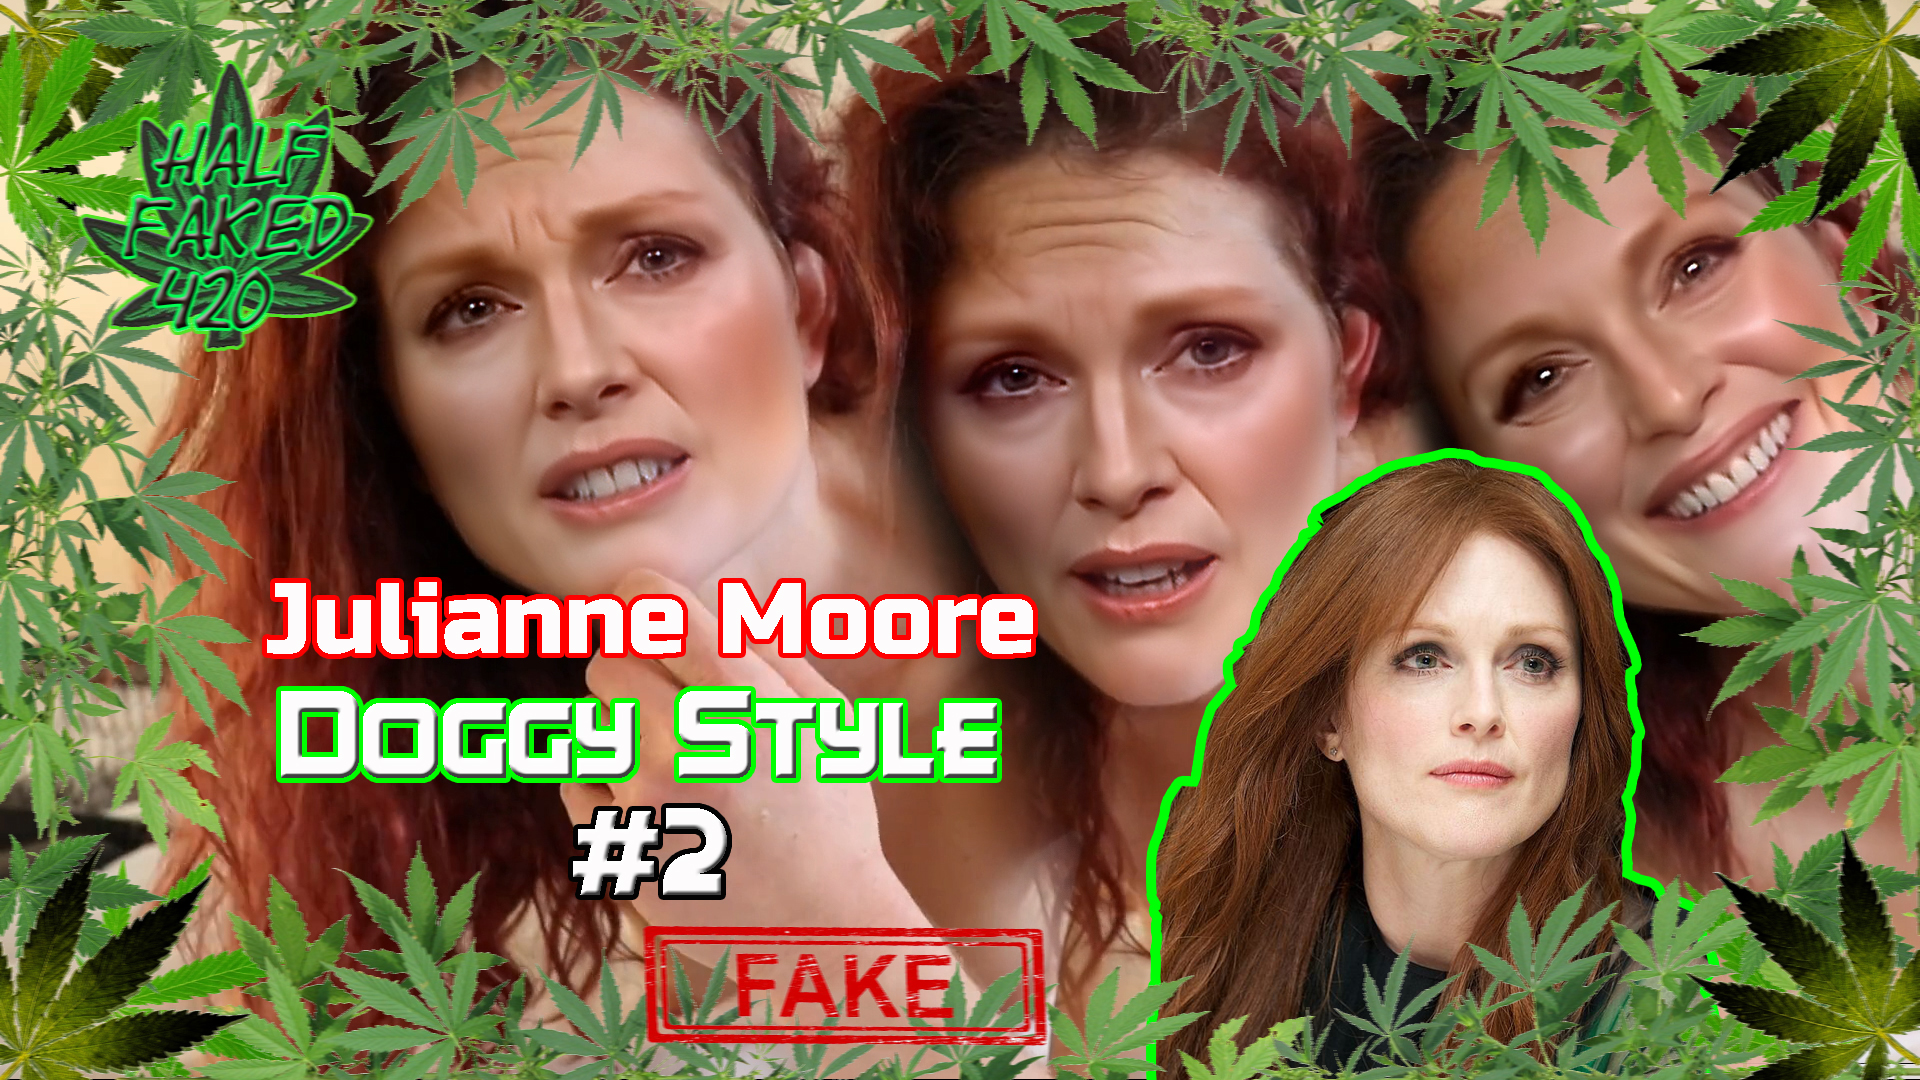 Julianne Moore - Doggy Style #2 | FAKE